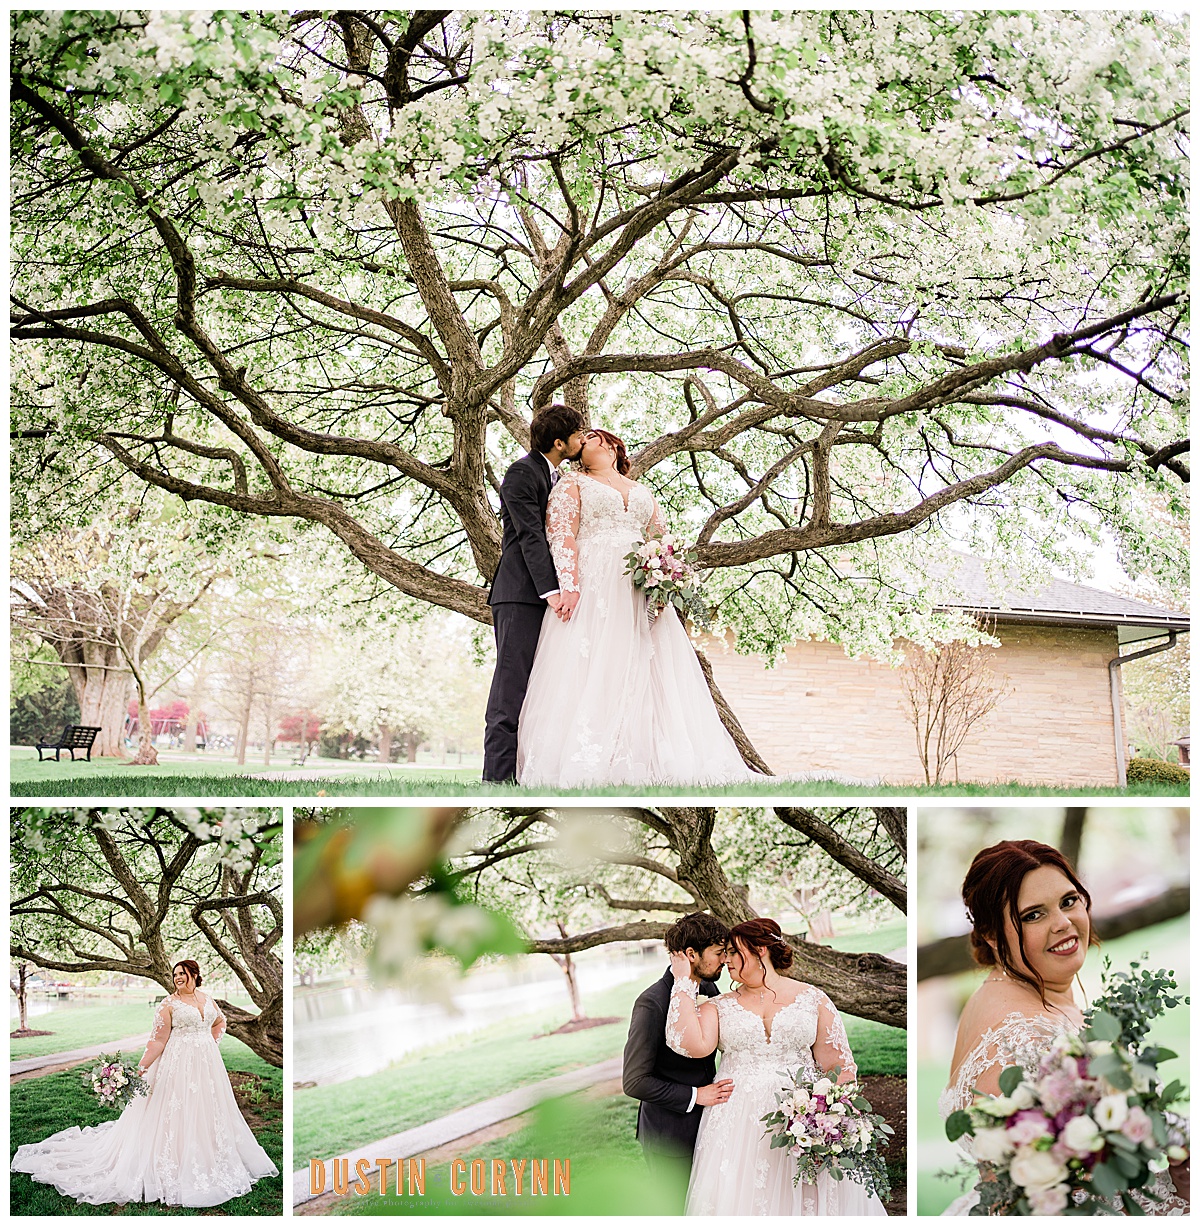 Spring wedding with bride and groom holding hands under a blooming blossom tree